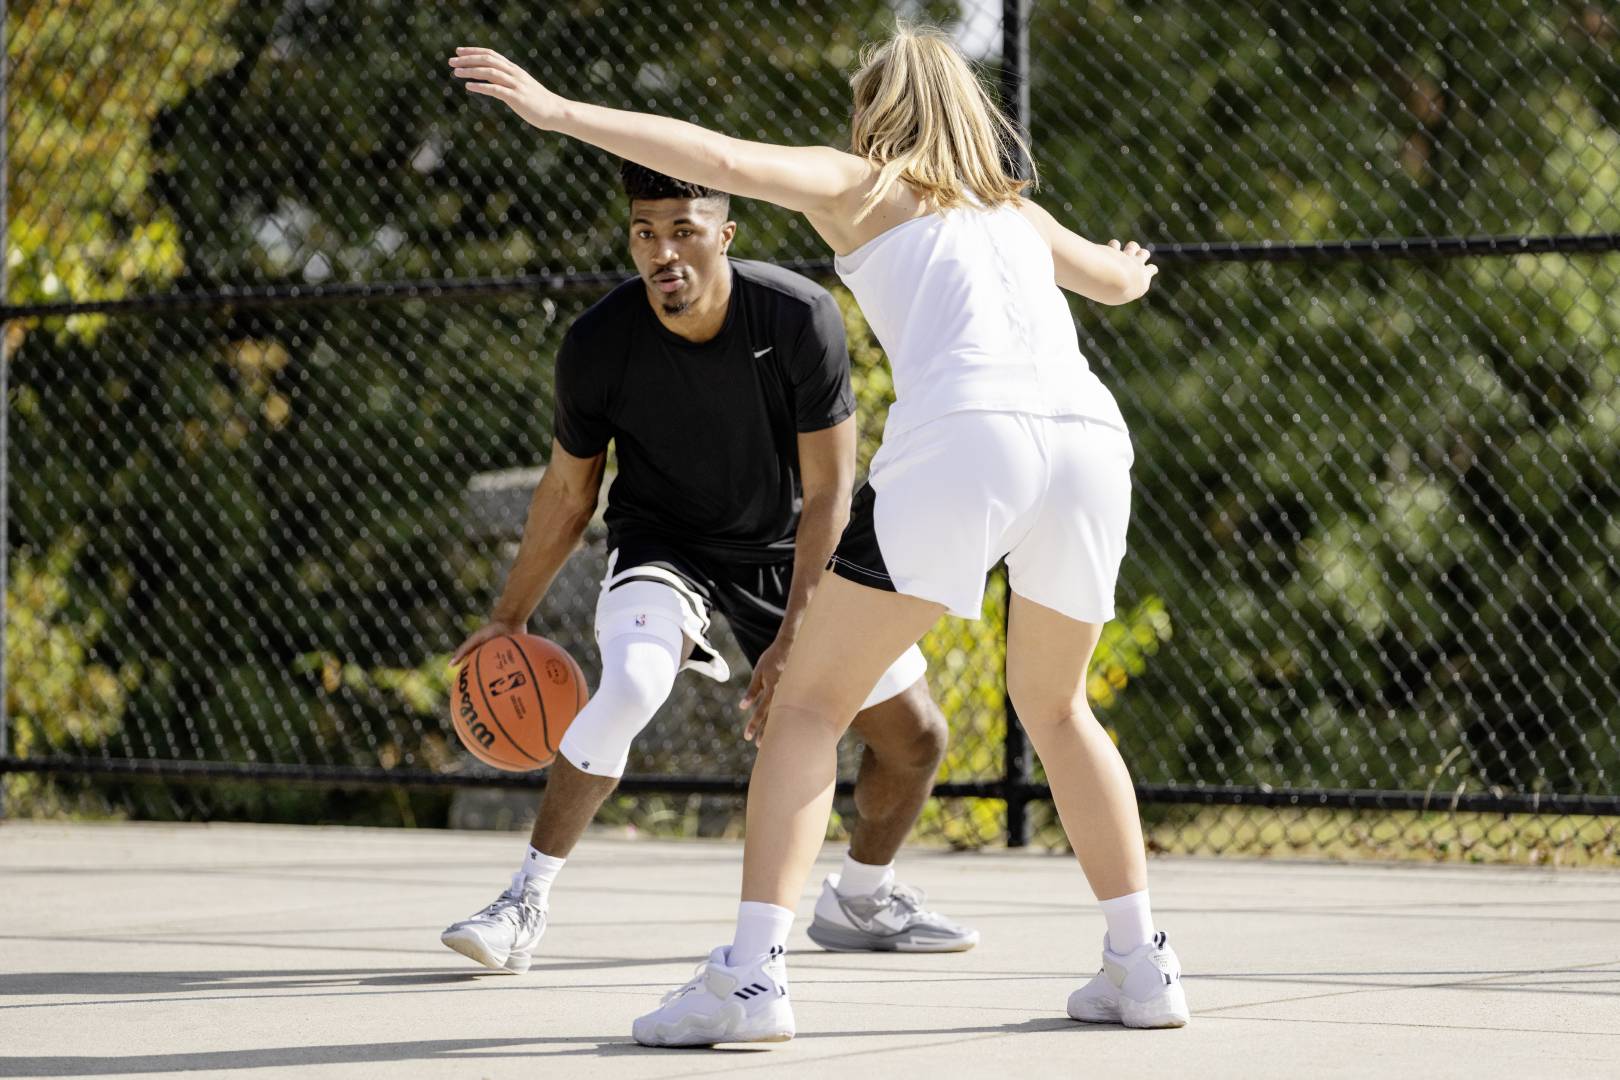 Streetball player with white Knee Sleeve tries to come past an opponent who is waiting for him with the arms spread out